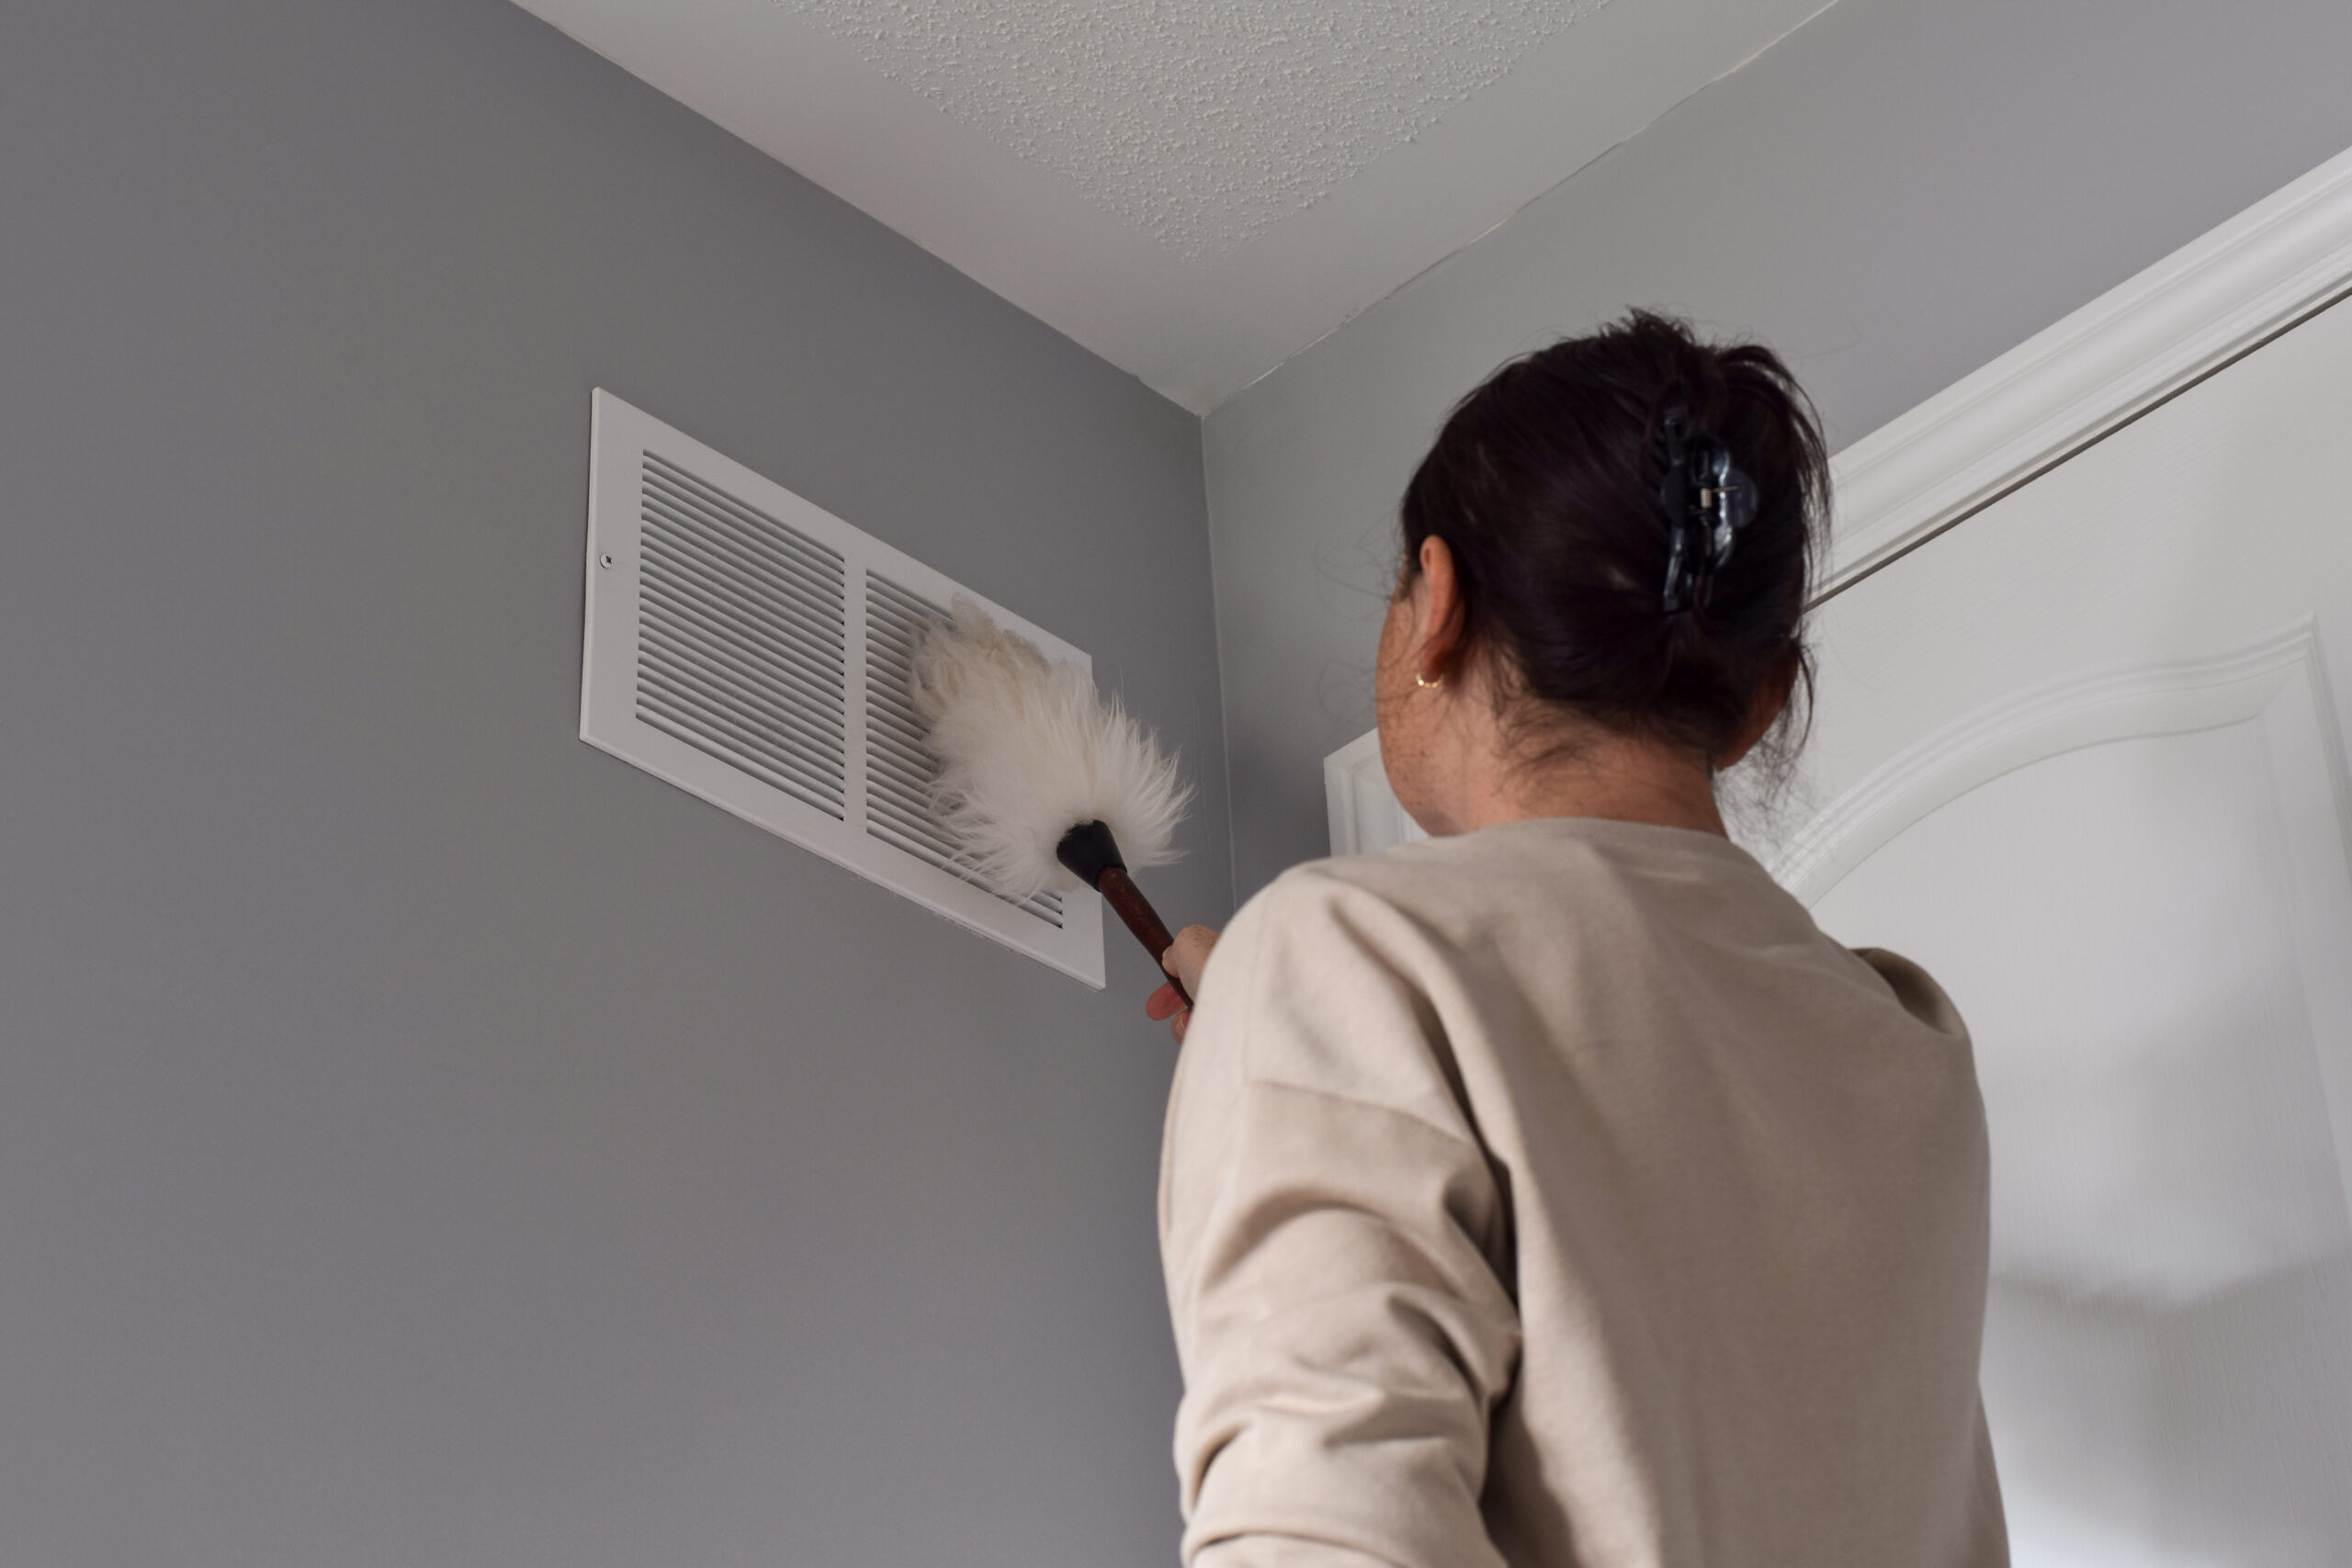 Air Duct Cleaning in Your Home